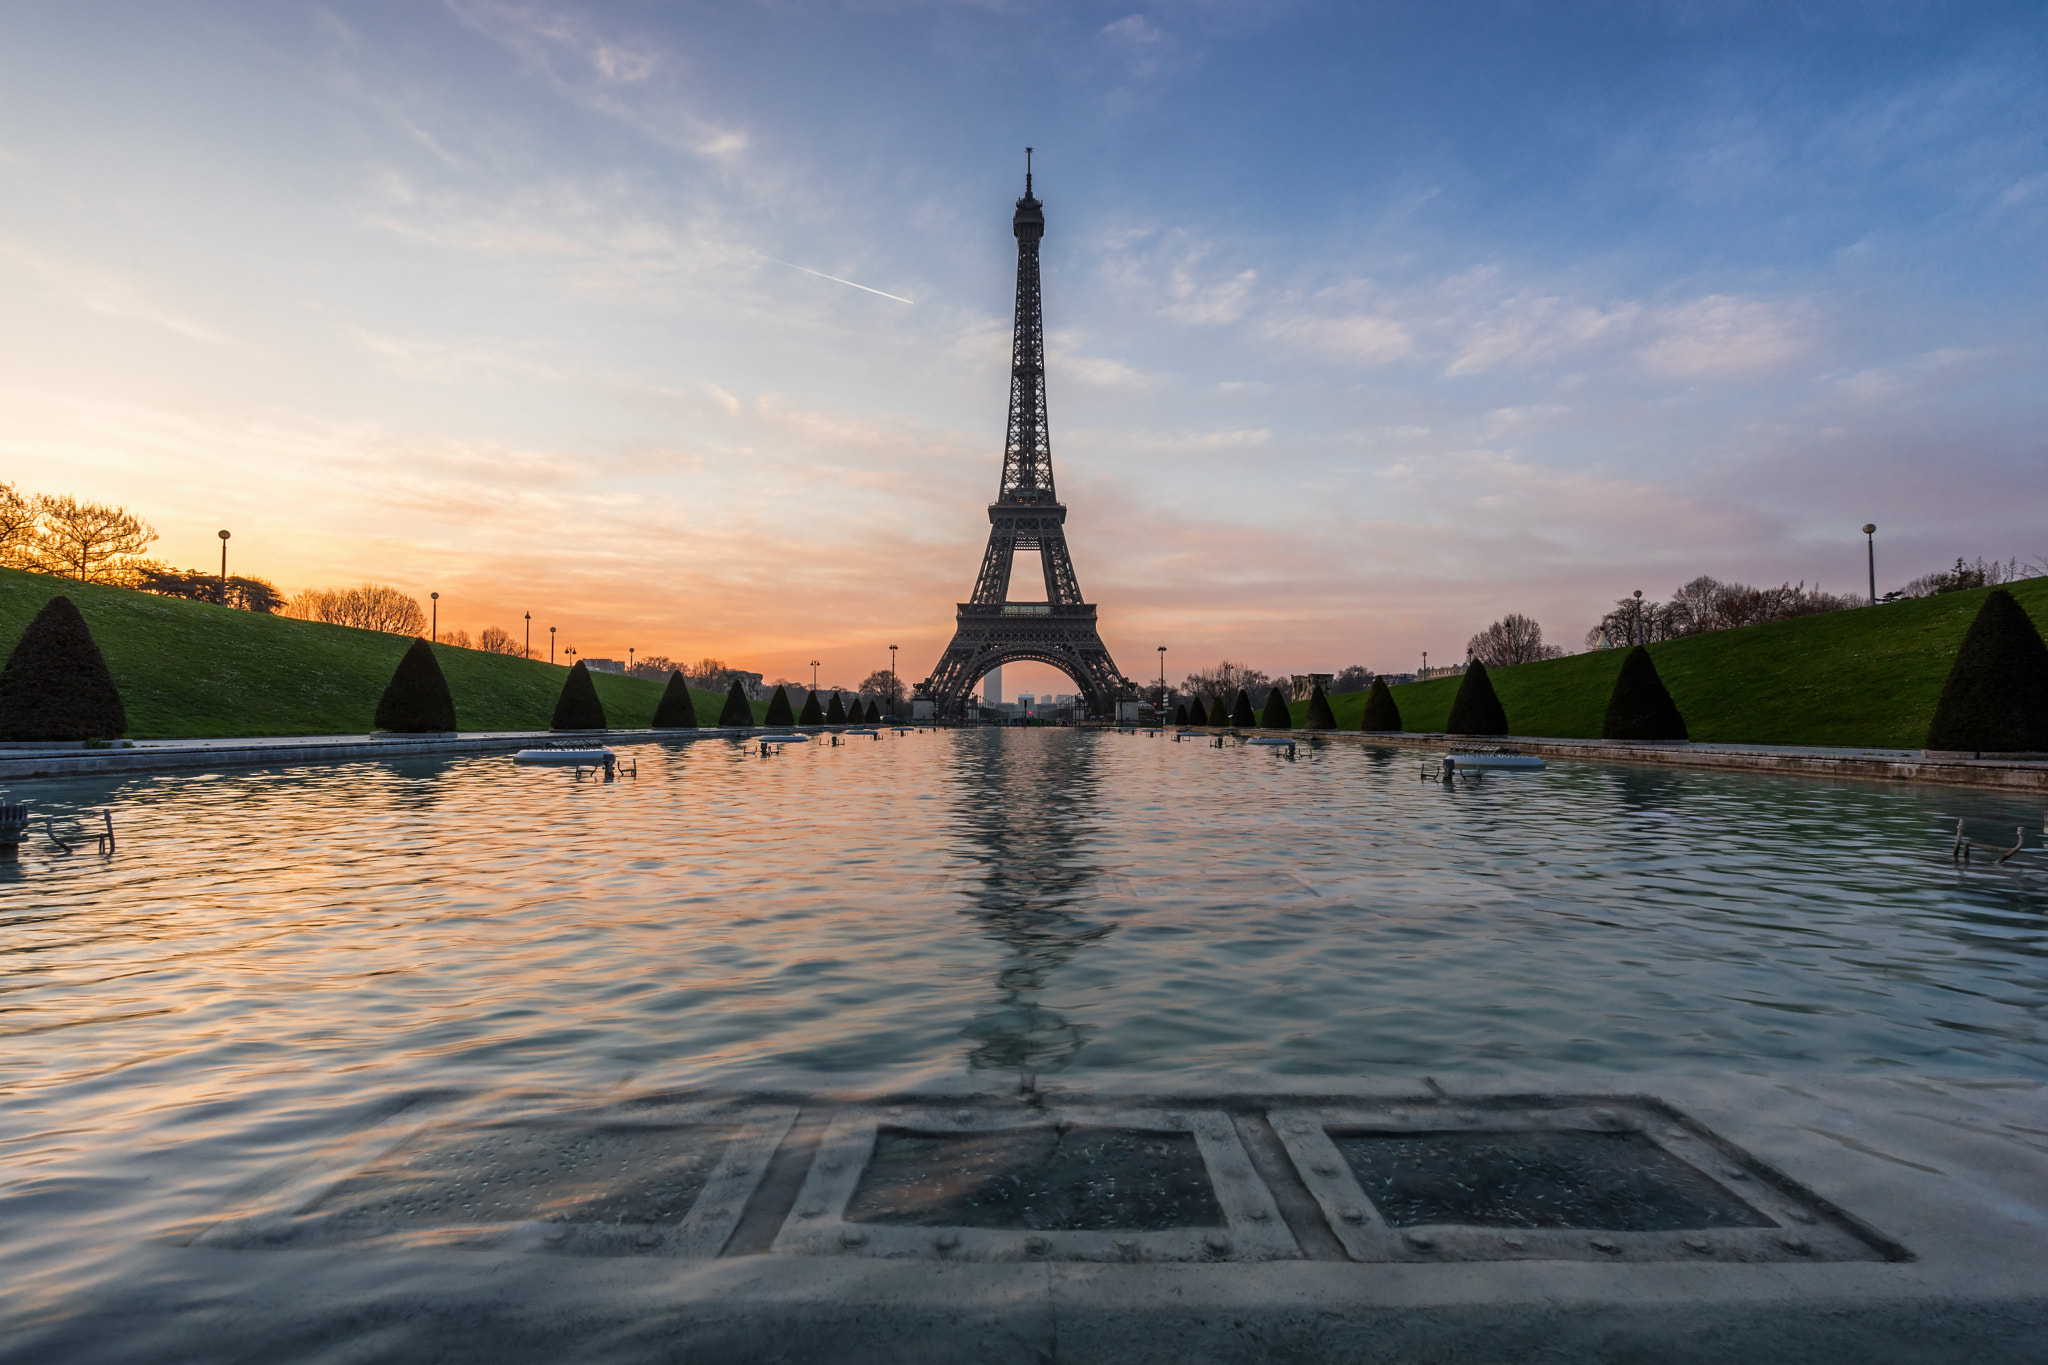 Sony a7 sample photo. Sunrise at the eiffel tower in paris, france photography